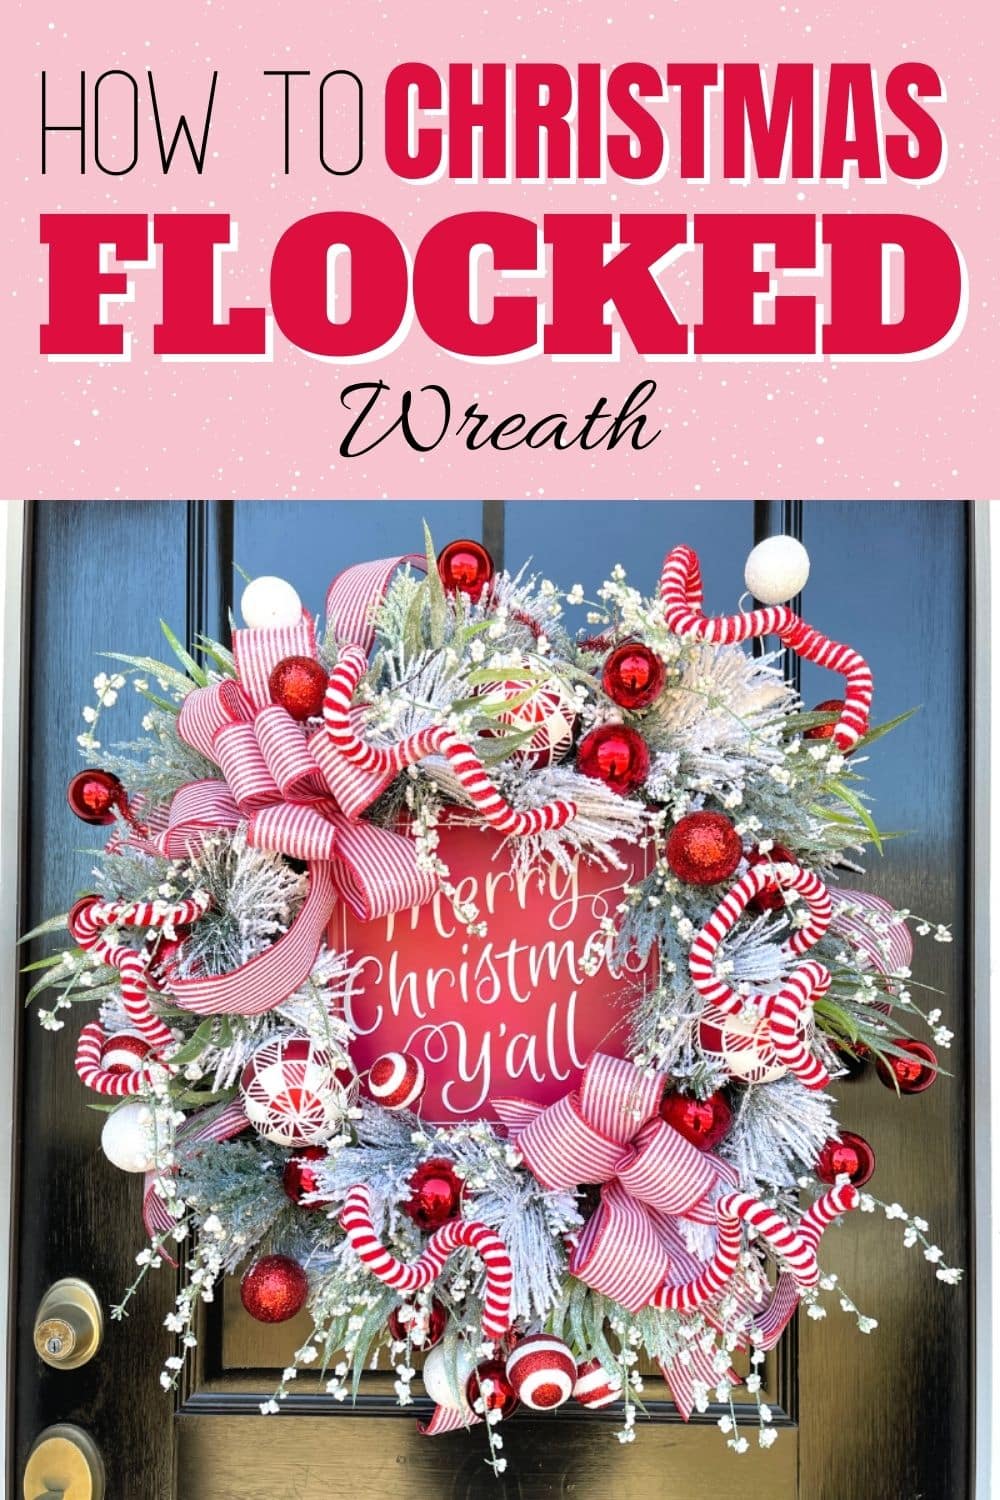 How to Make a Merry Christmas Flocked Wreath - Southern Charm Wreaths